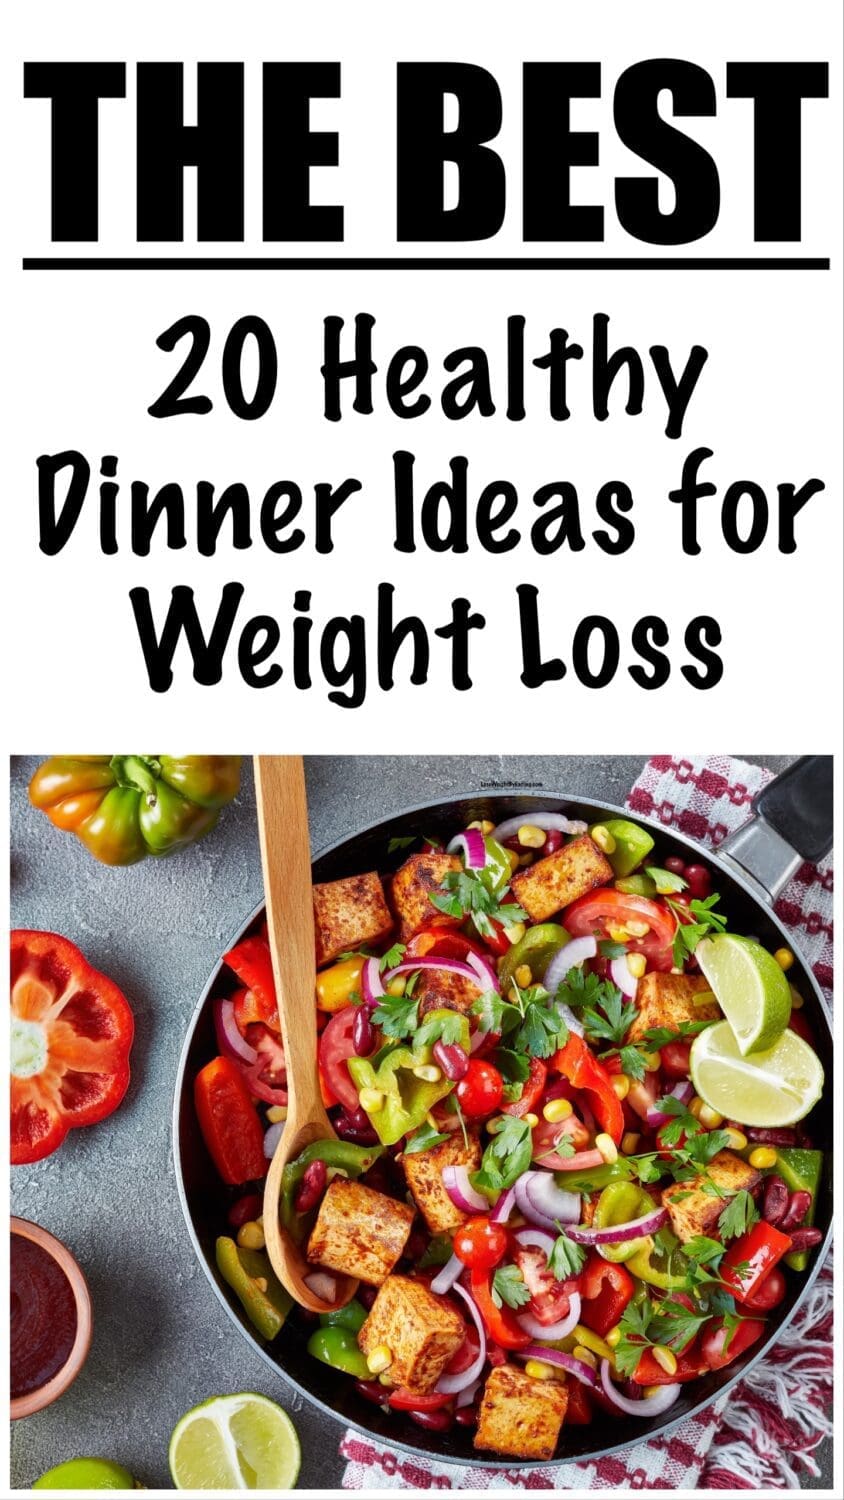 20 Low Calorie Healthy Dinner Ideas for Weight Loss